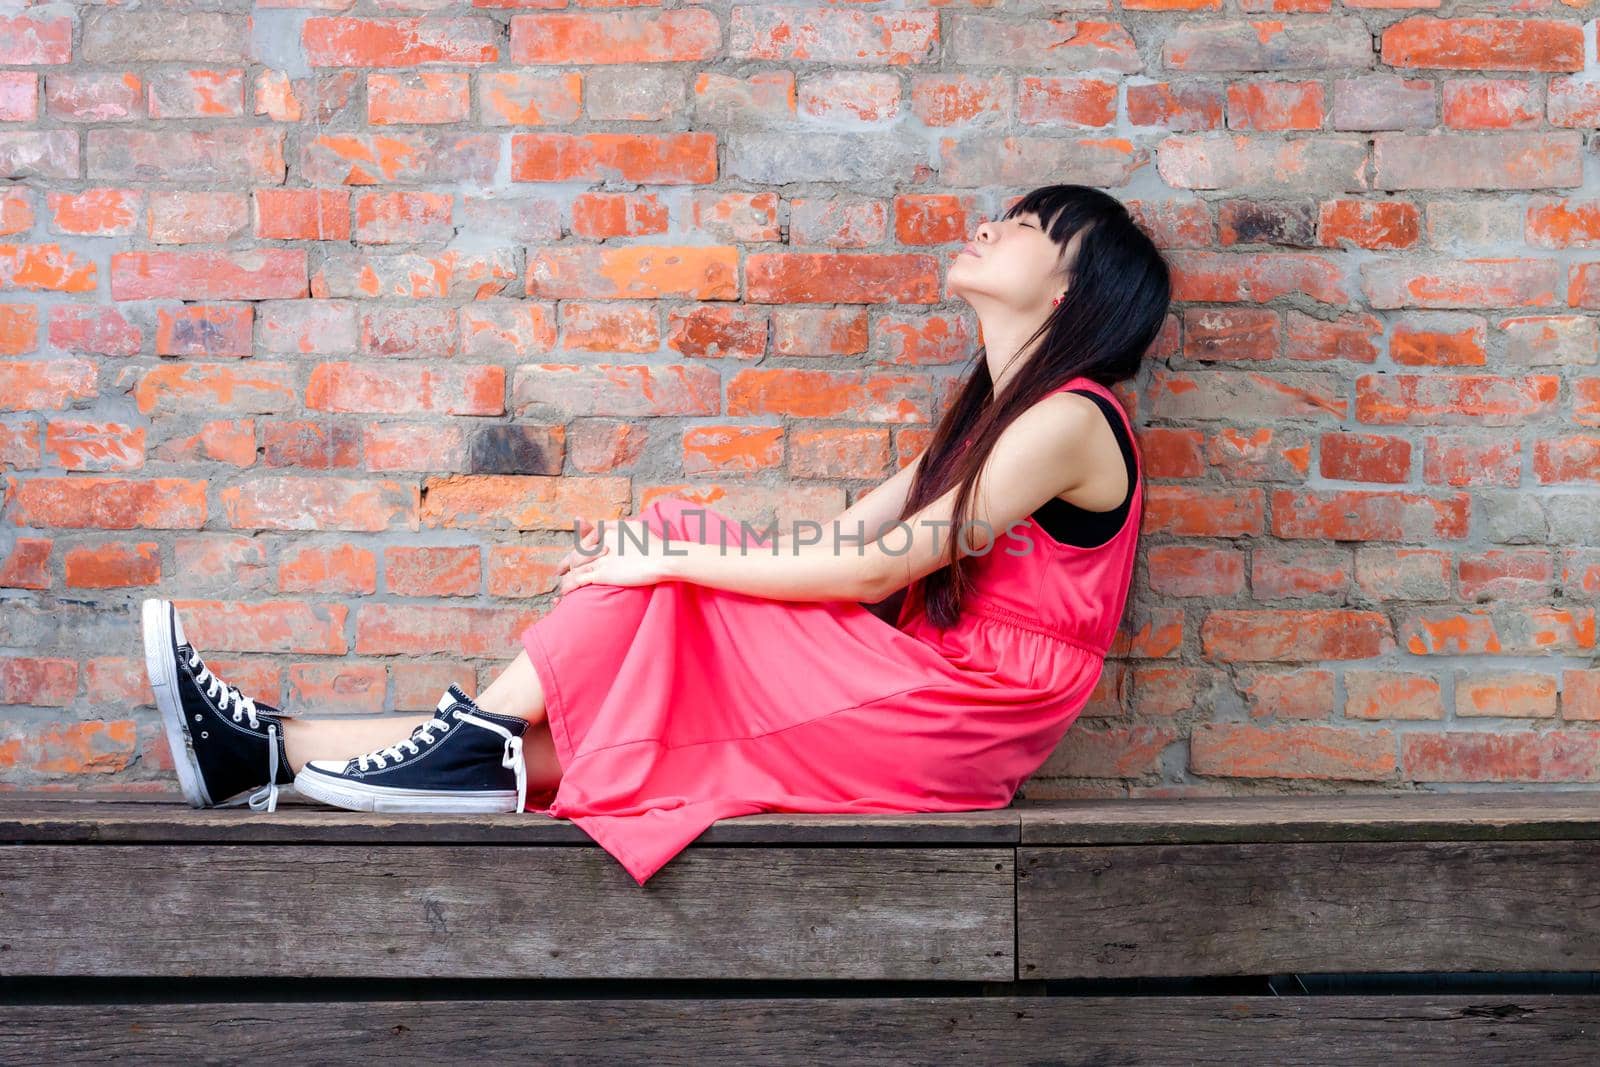 Young Asian woman sitting by red brick wall feeling pensive by imagesbykenny